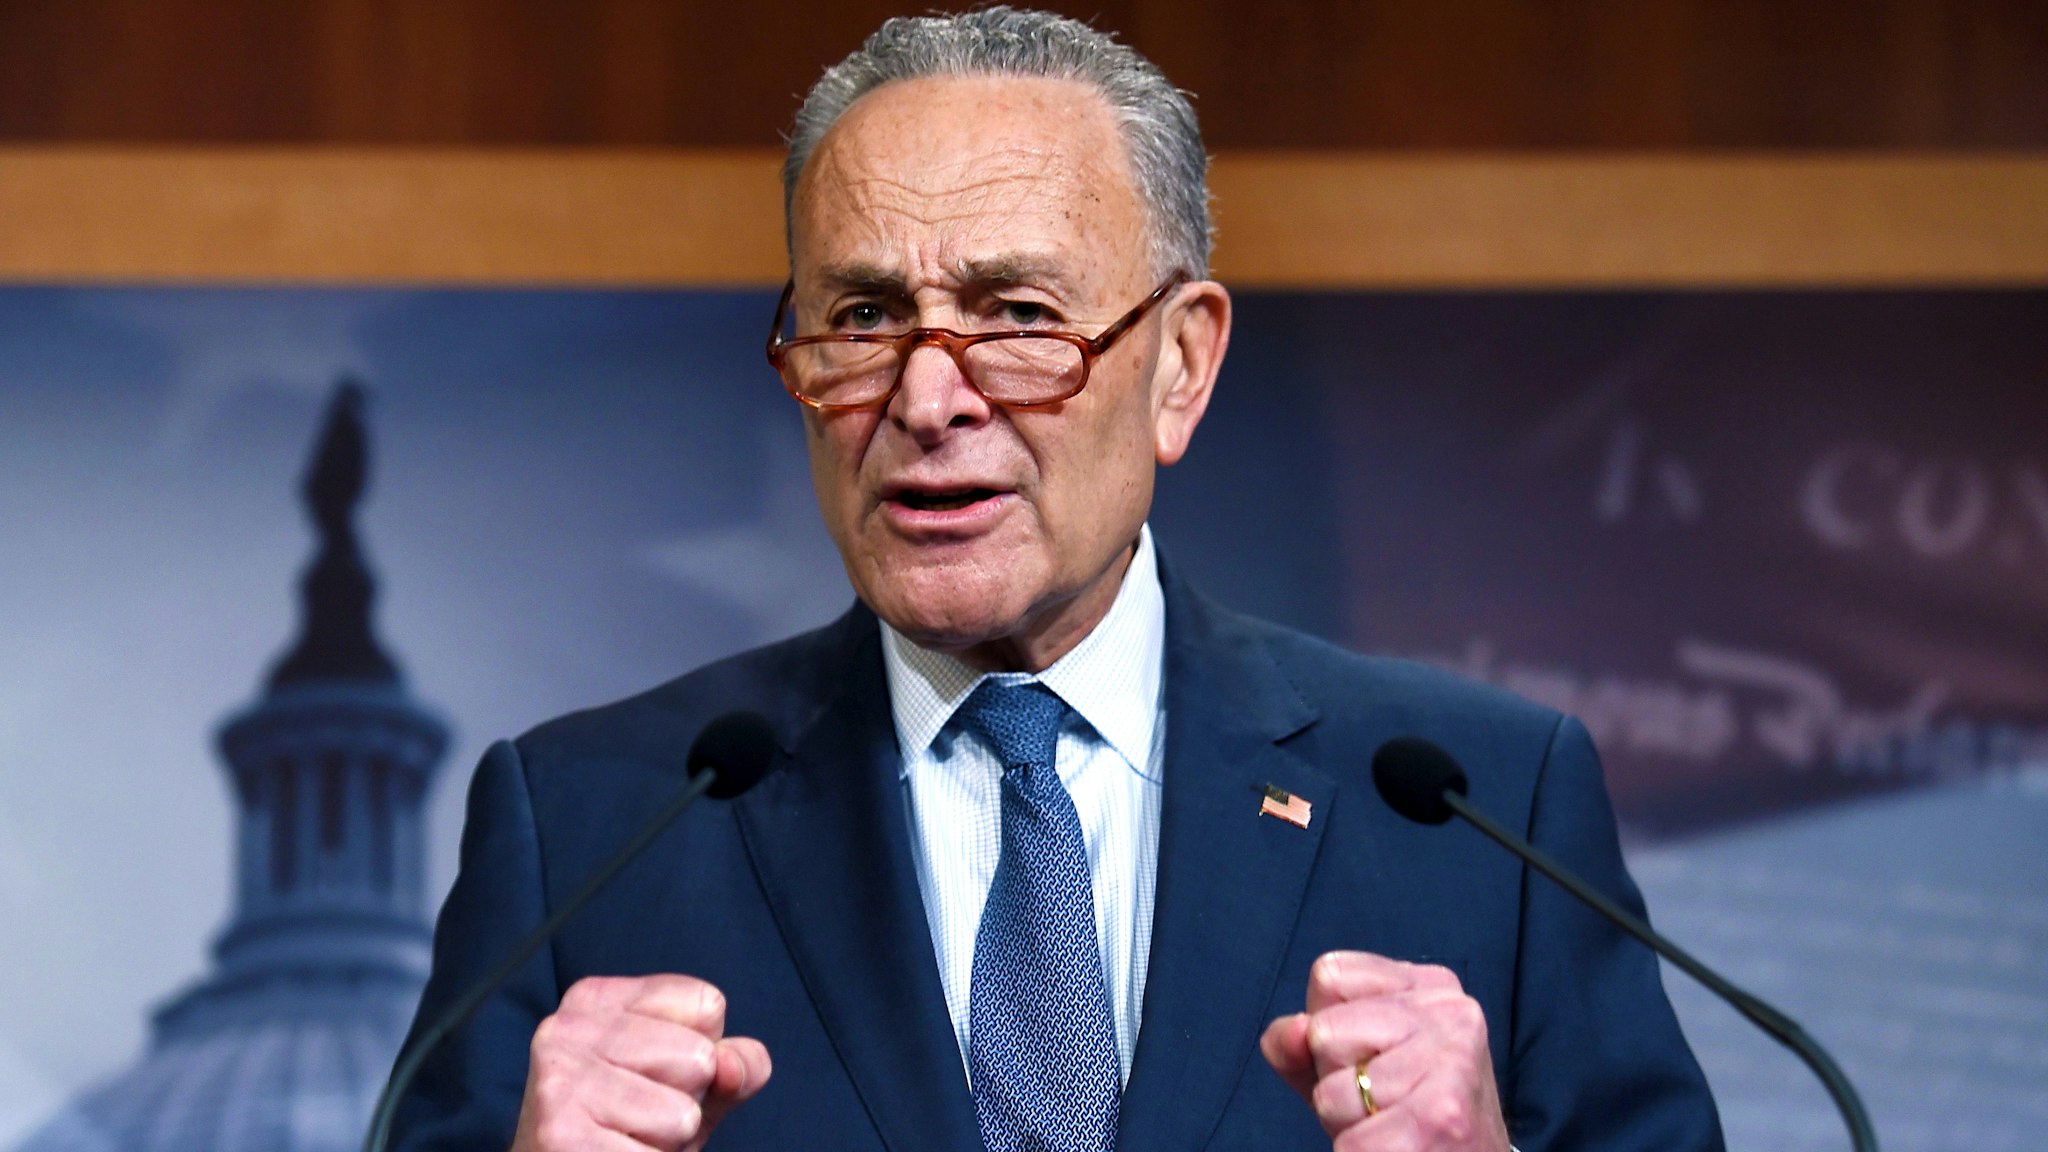 Senate Minority Leader Chuck Schumer (D-NY), speaks about the the Senate Impeachment trial at the Capitol, January 16, 2020, in Washington, DC. - Members of the US Senate were sworn in on January 16 to serve as jurors at the historic impeachment trial of President Donald Trump.